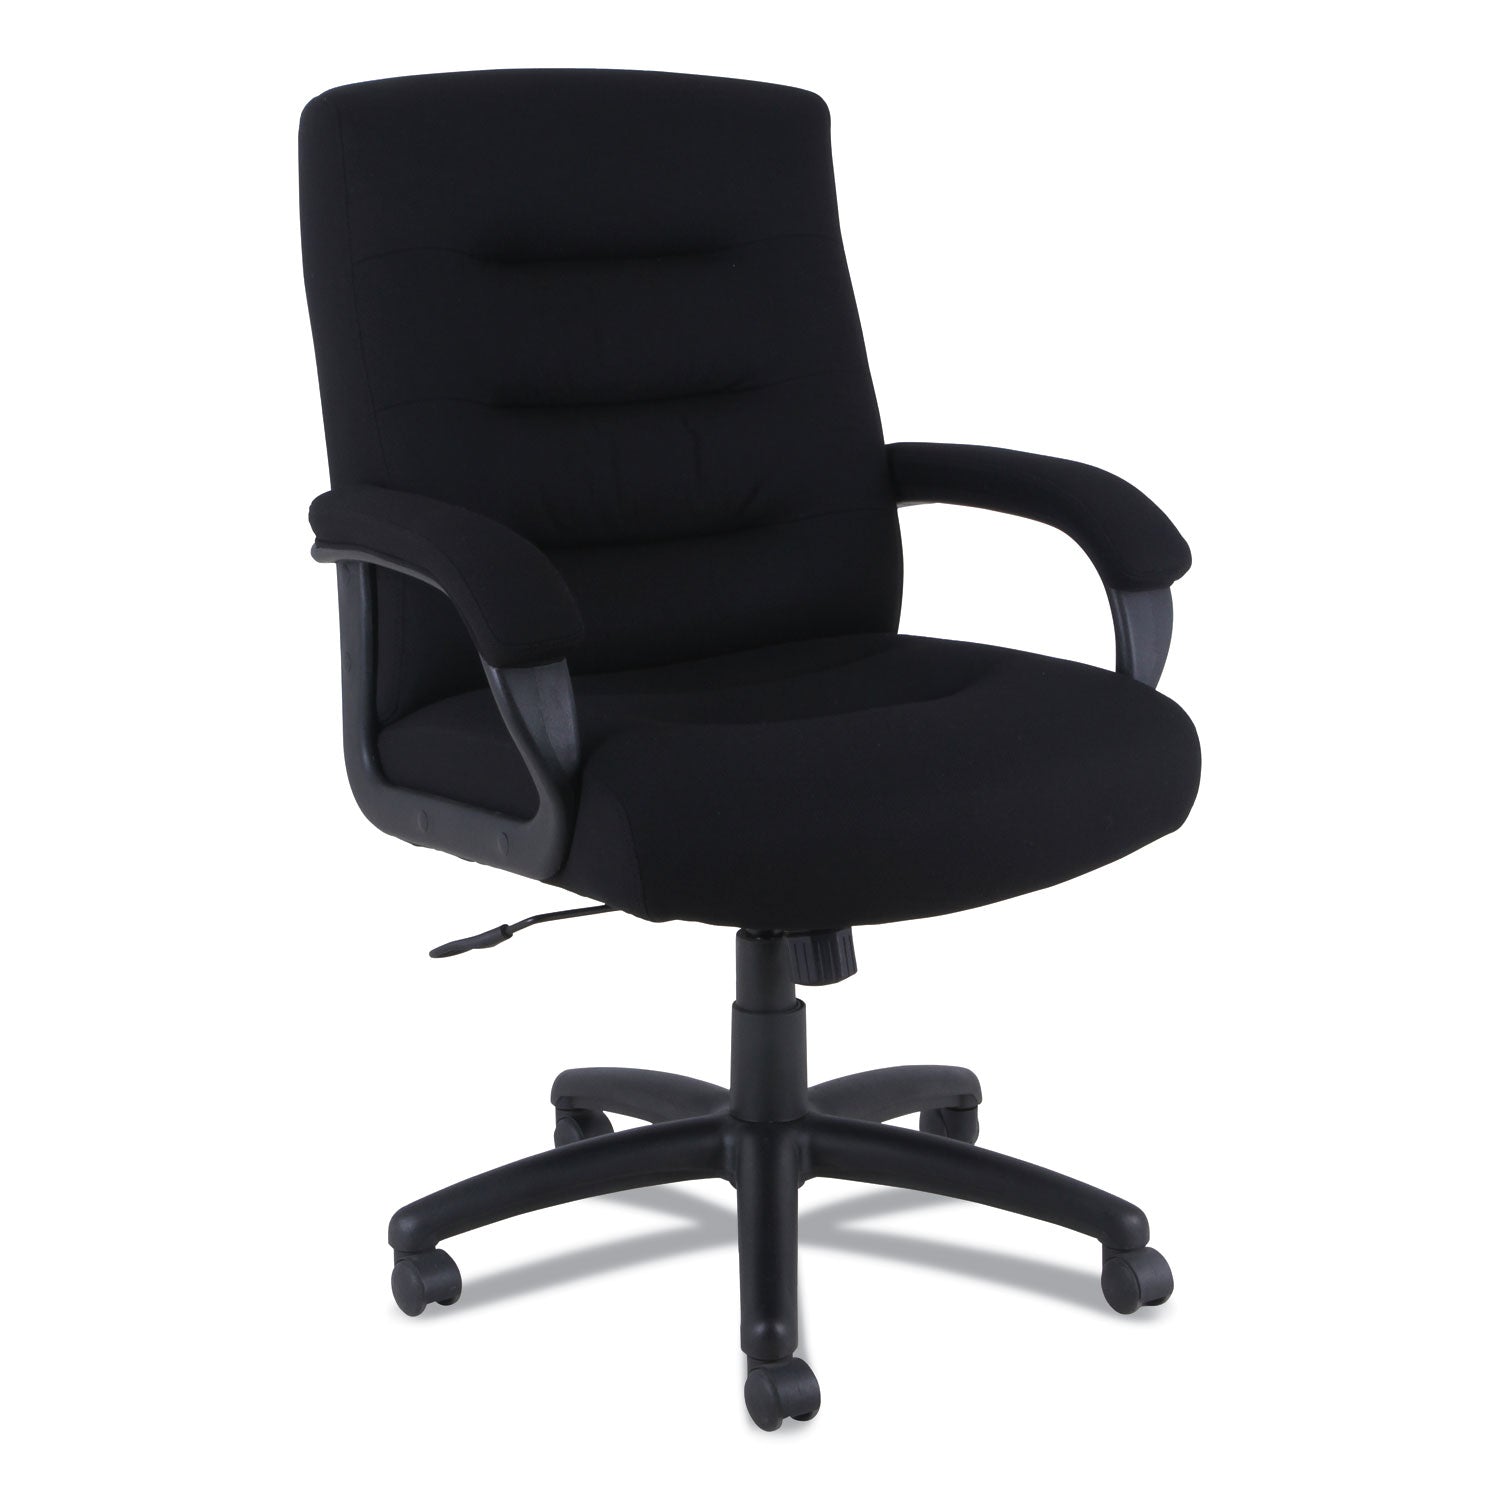 alera-kesson-series-mid-back-office-chair-supports-up-to-300-lb-1803-to-2177-seat-height-black_aleks4210 - 1